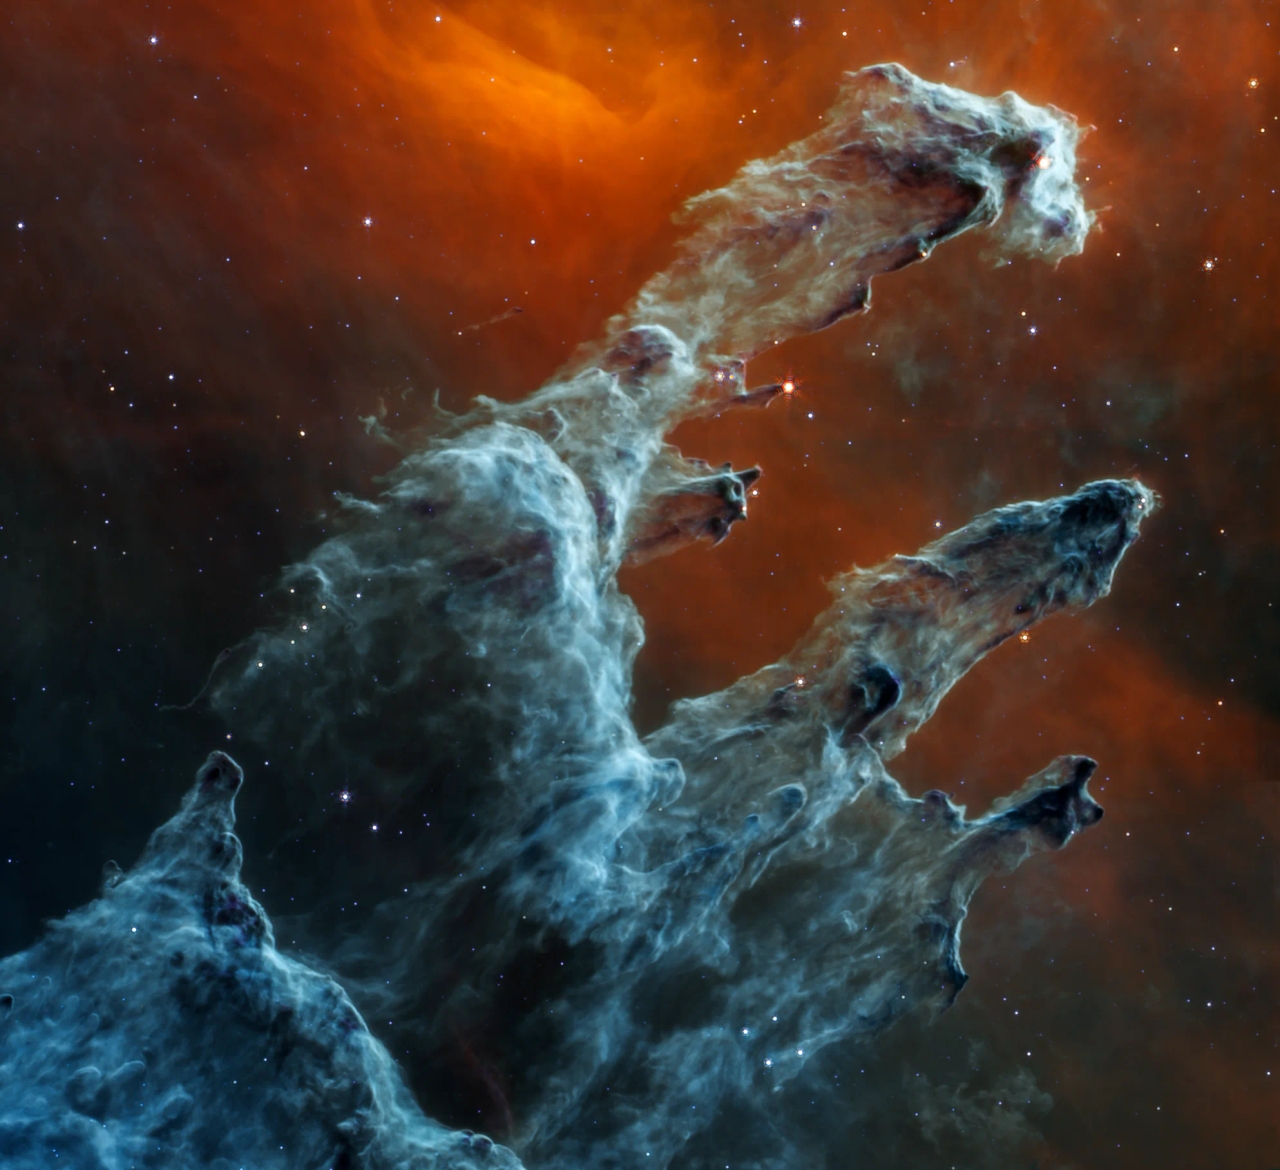 Mid-infrared view of the Pillars of Creation captured by the James Webb Space Telescope. Image credit: NASA